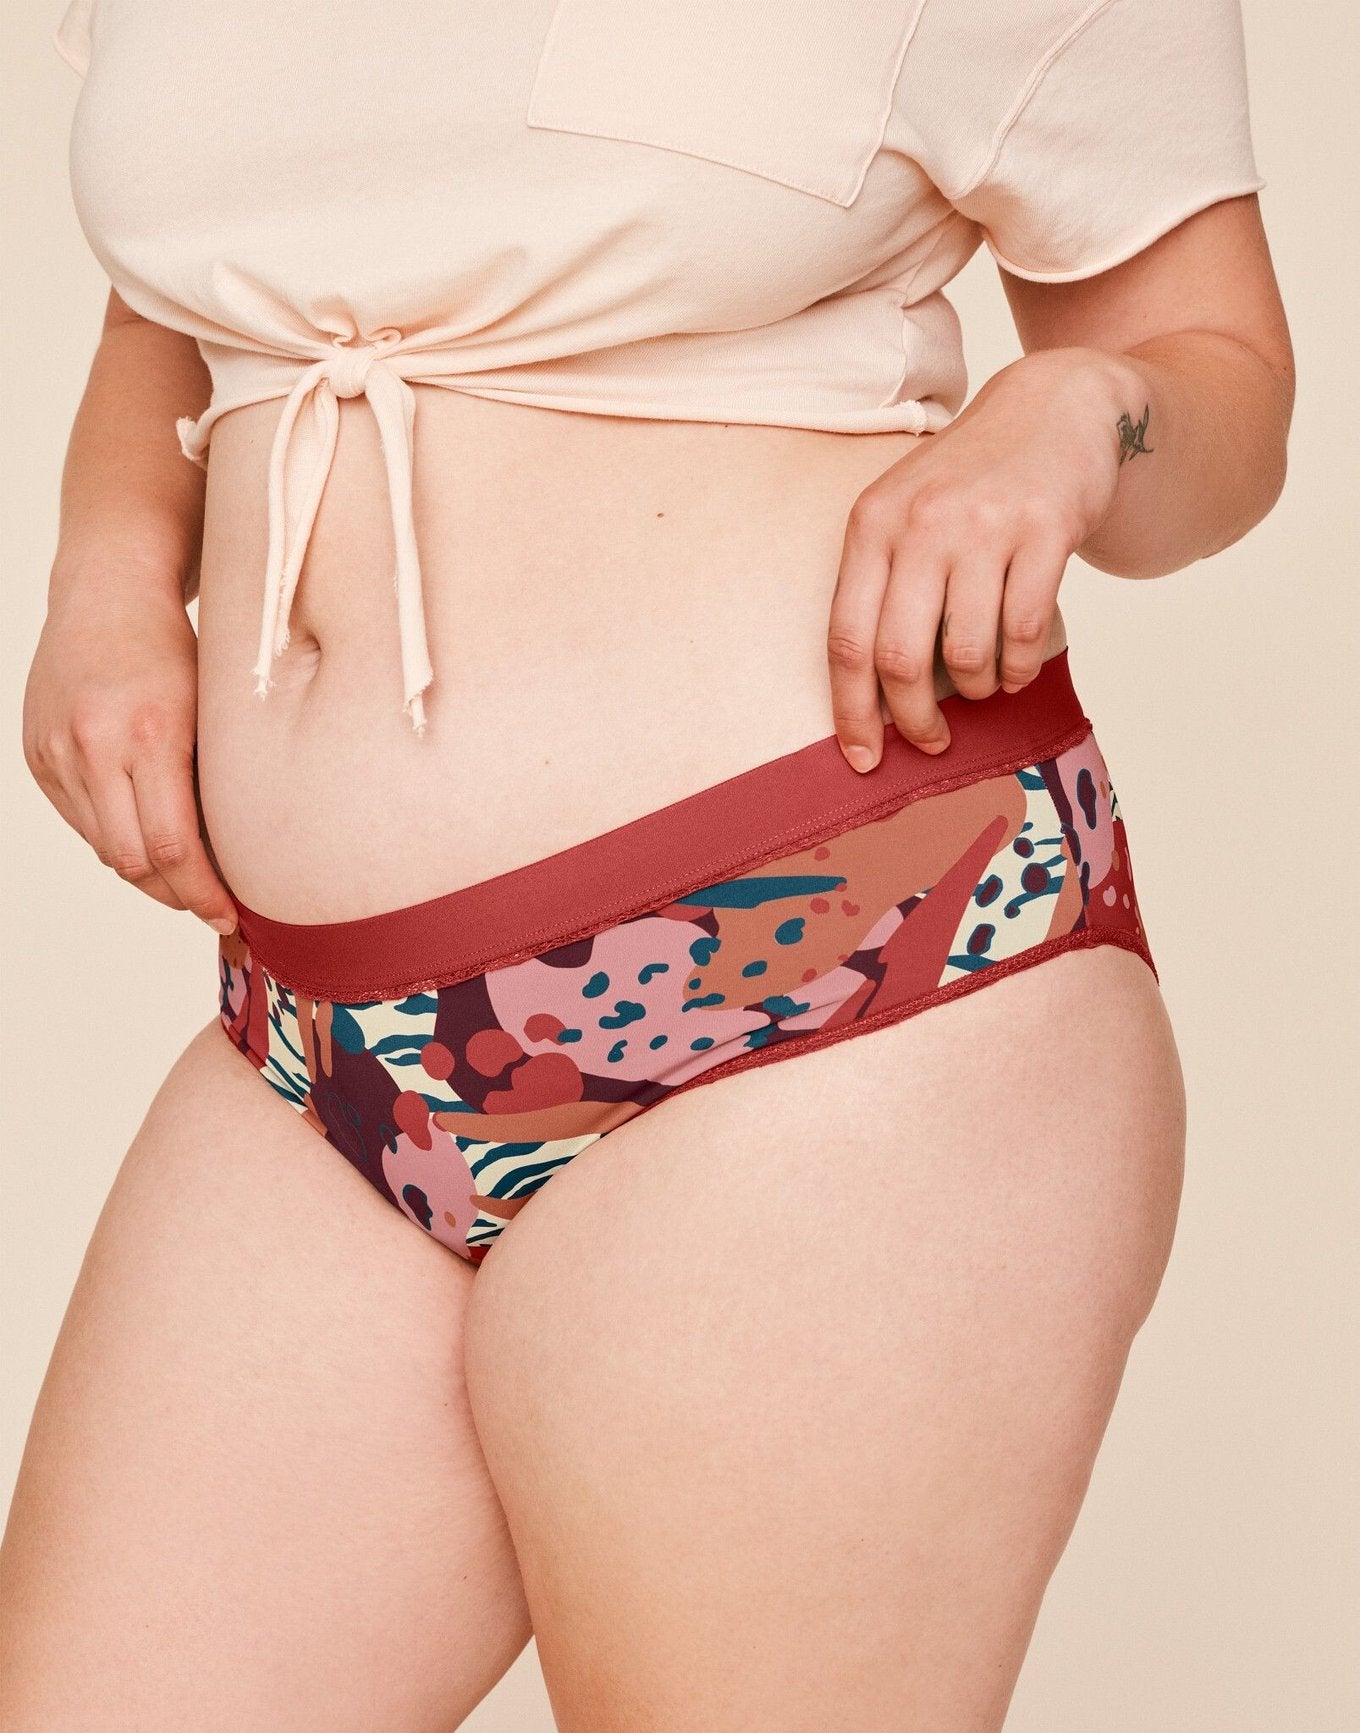 Joyja Olivia period-proof panty in color Wild Heart C01 and shape hipster